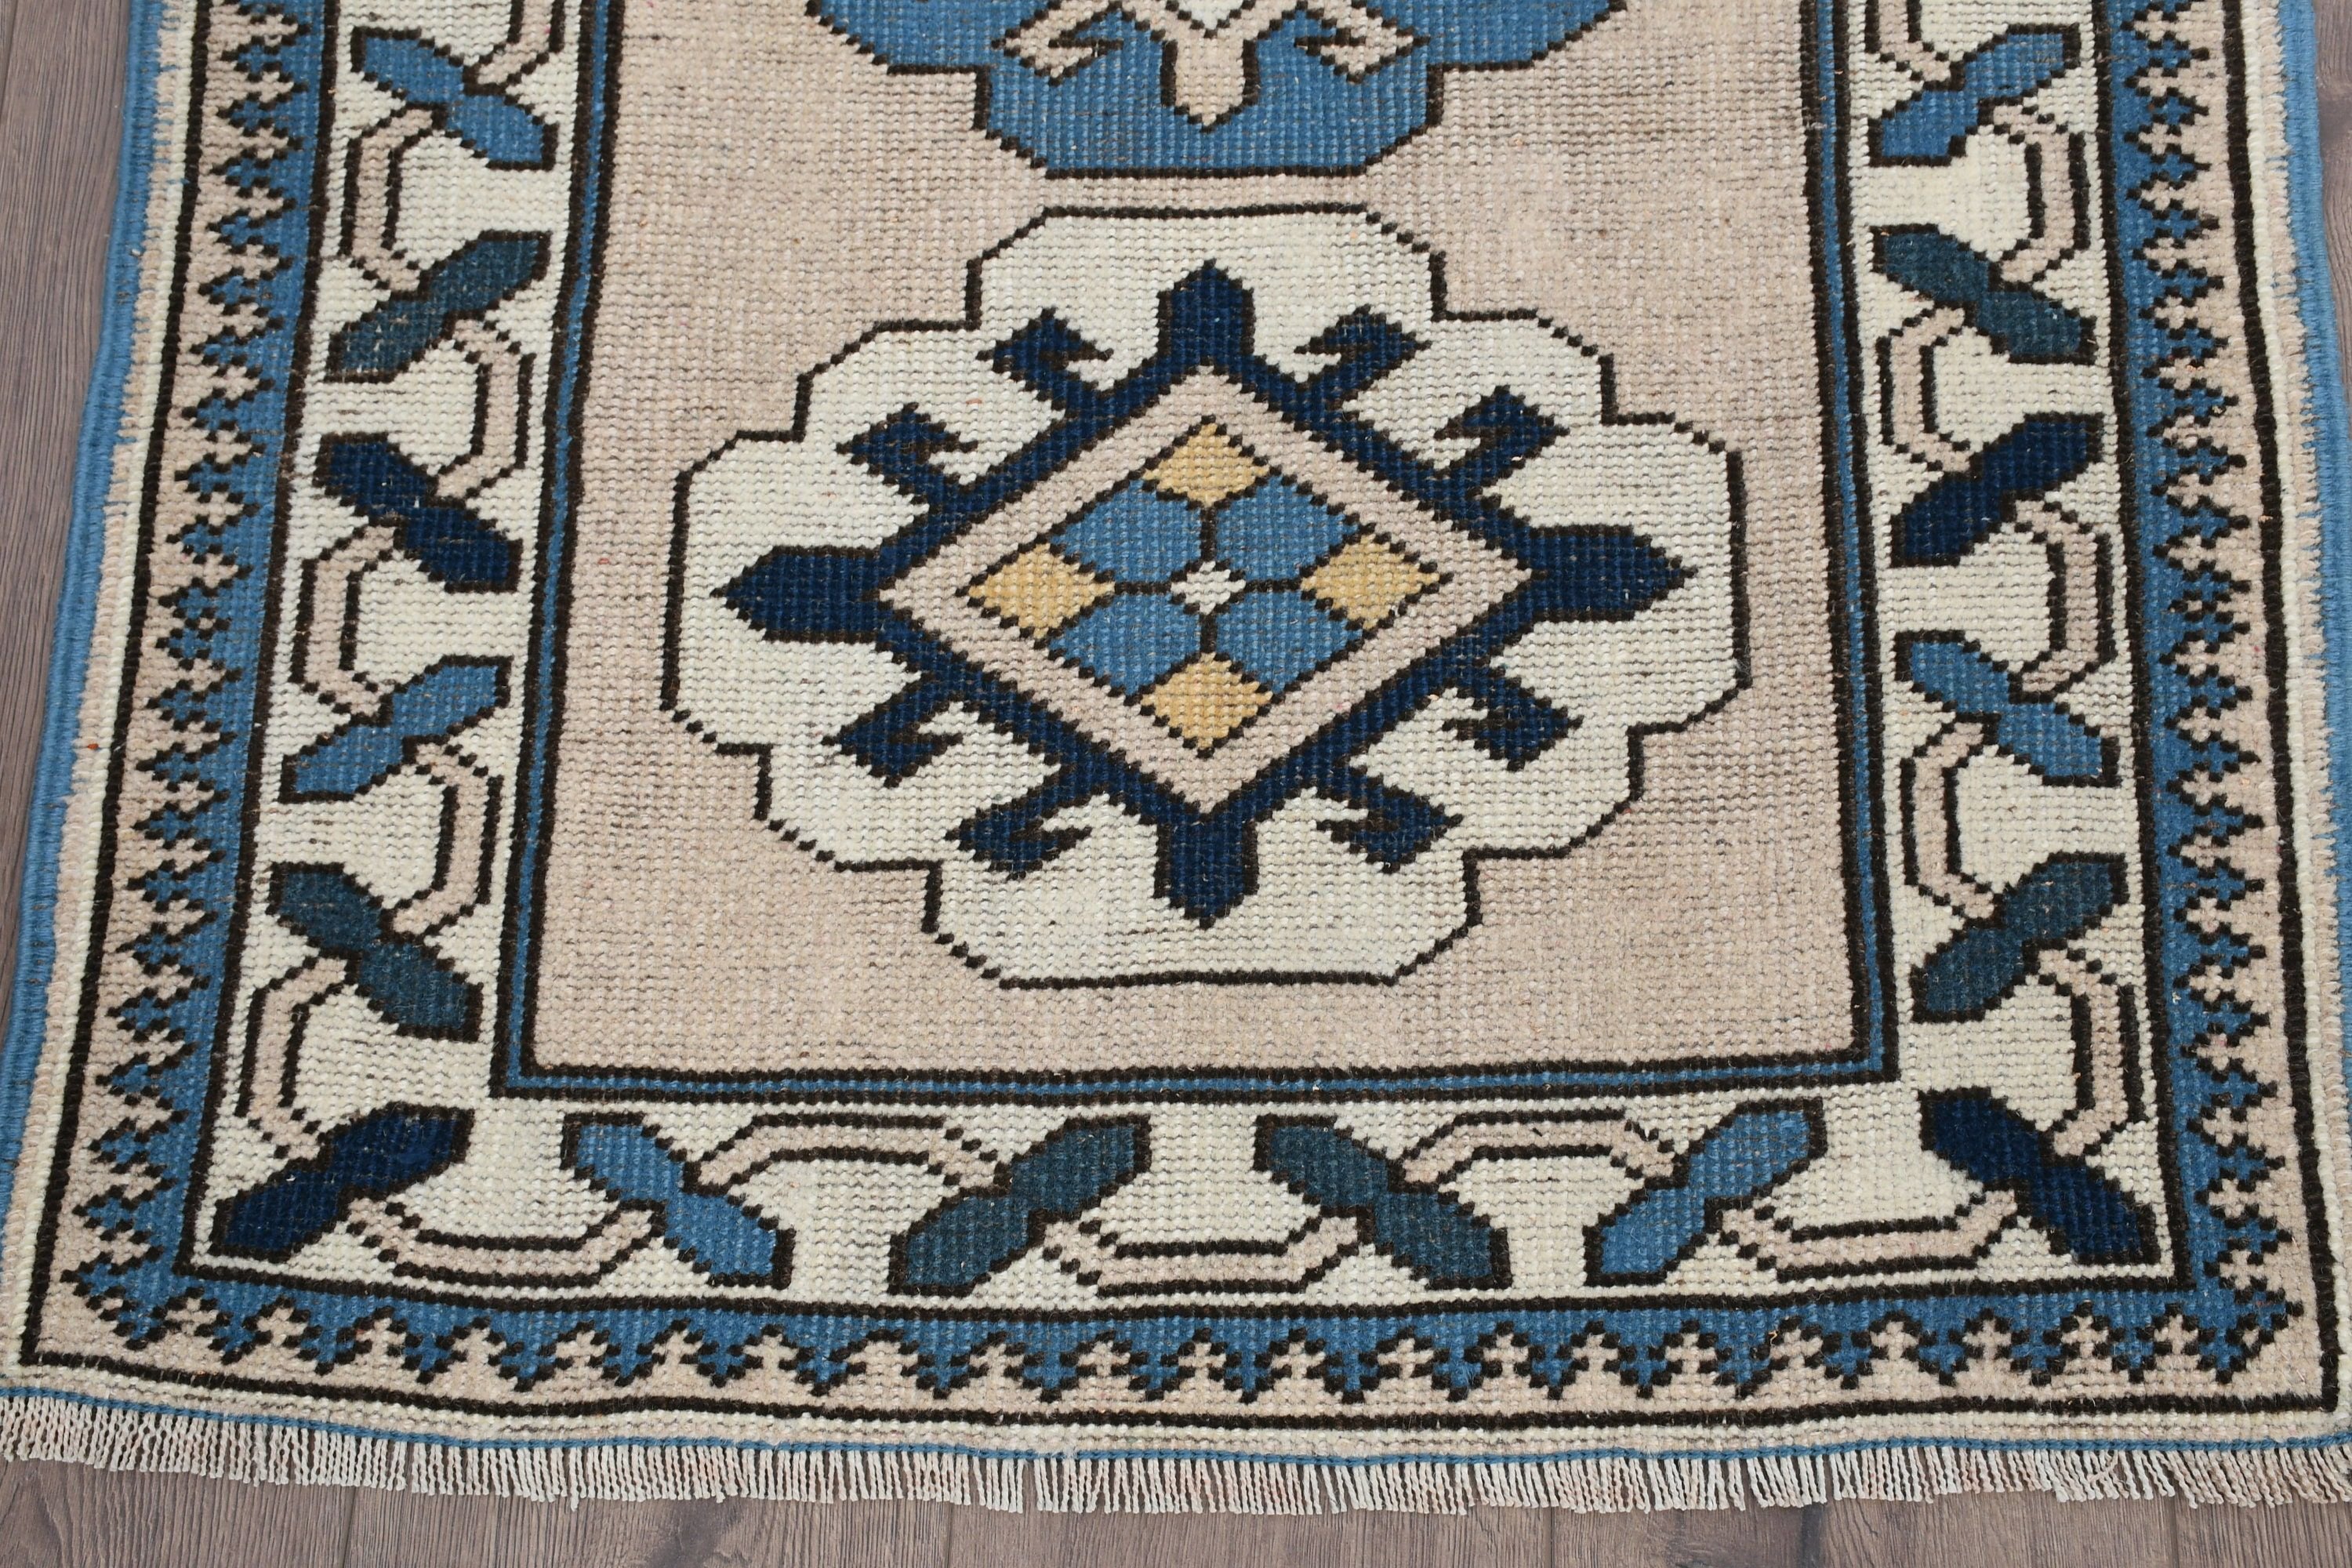 Wool Rug, Vintage Rugs, Entry Rug, Rugs for Wall Hanging, Blue Antique Rug, Turkish Rug, Bedroom Rug, 2.6x4 ft Small Rugs